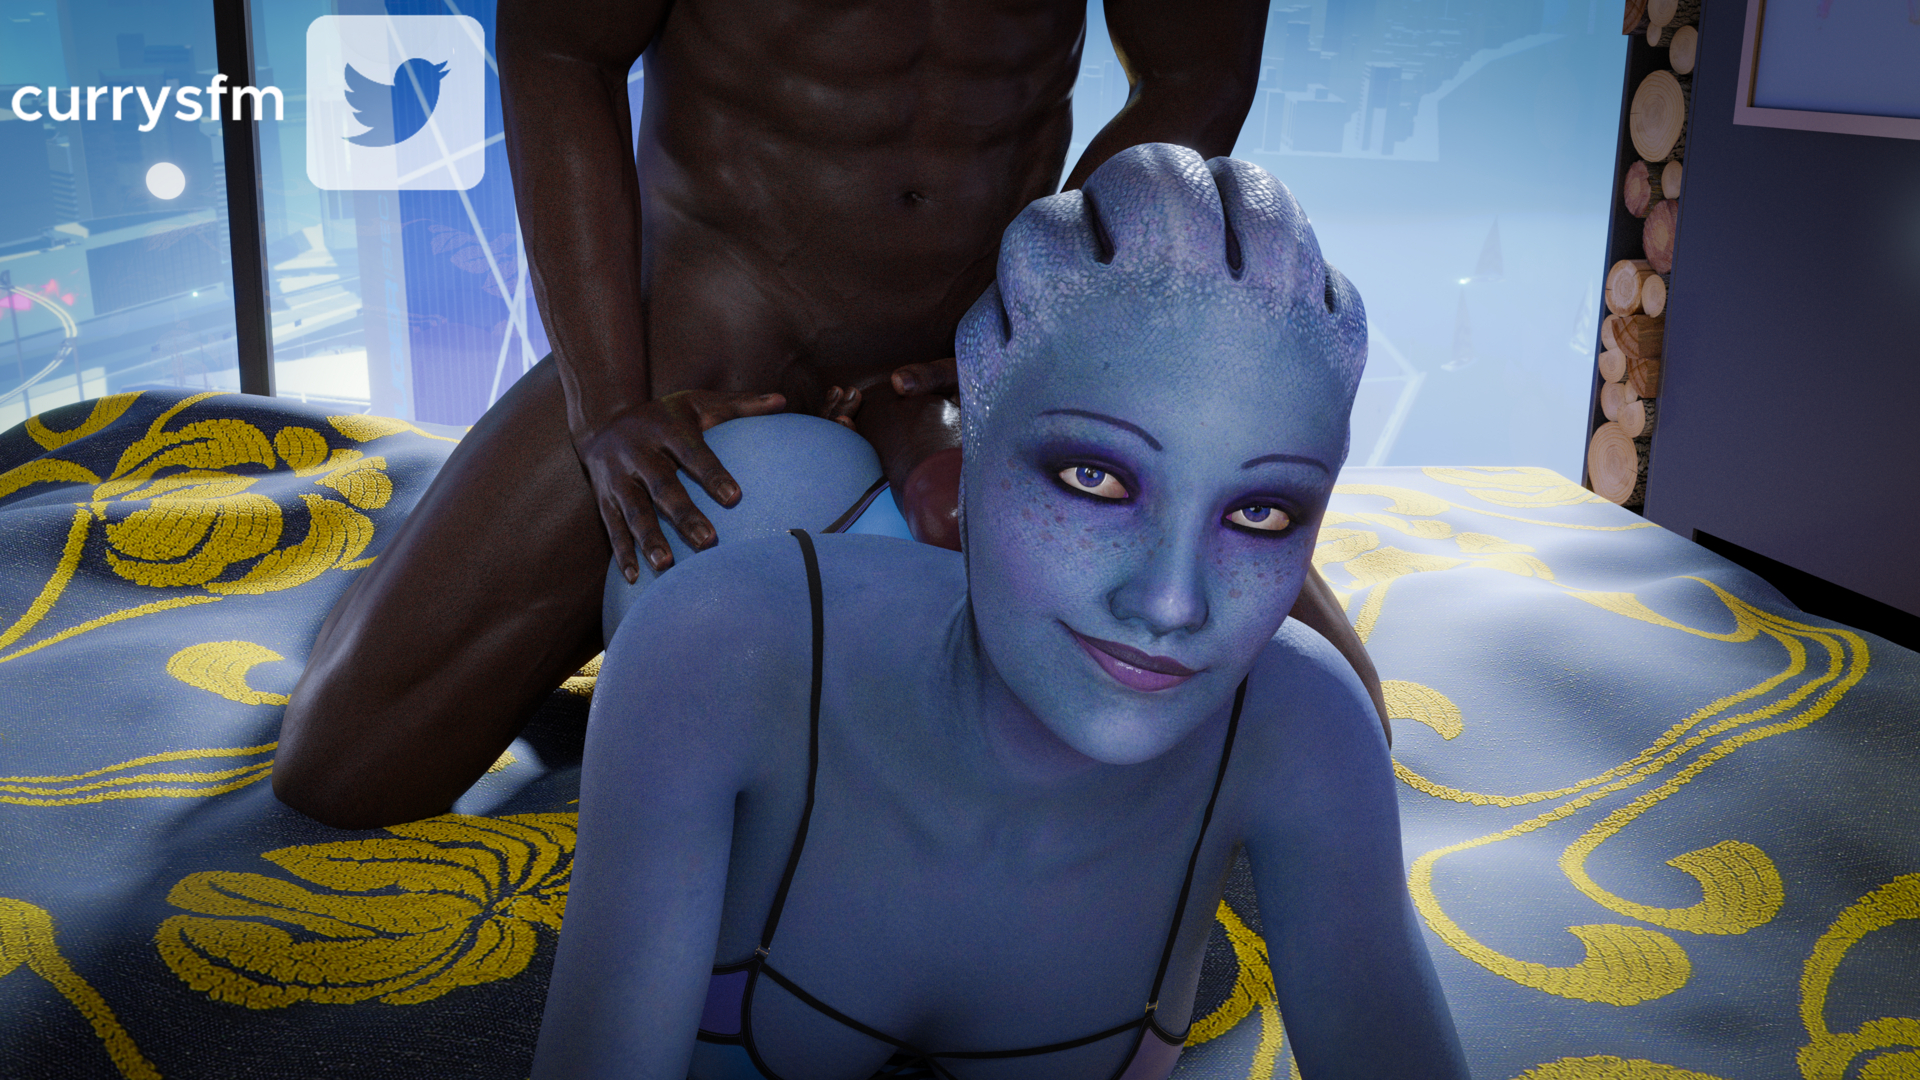 Image #7279: liara t'soni, mass effect, currysfm from currysfm - Rule 34